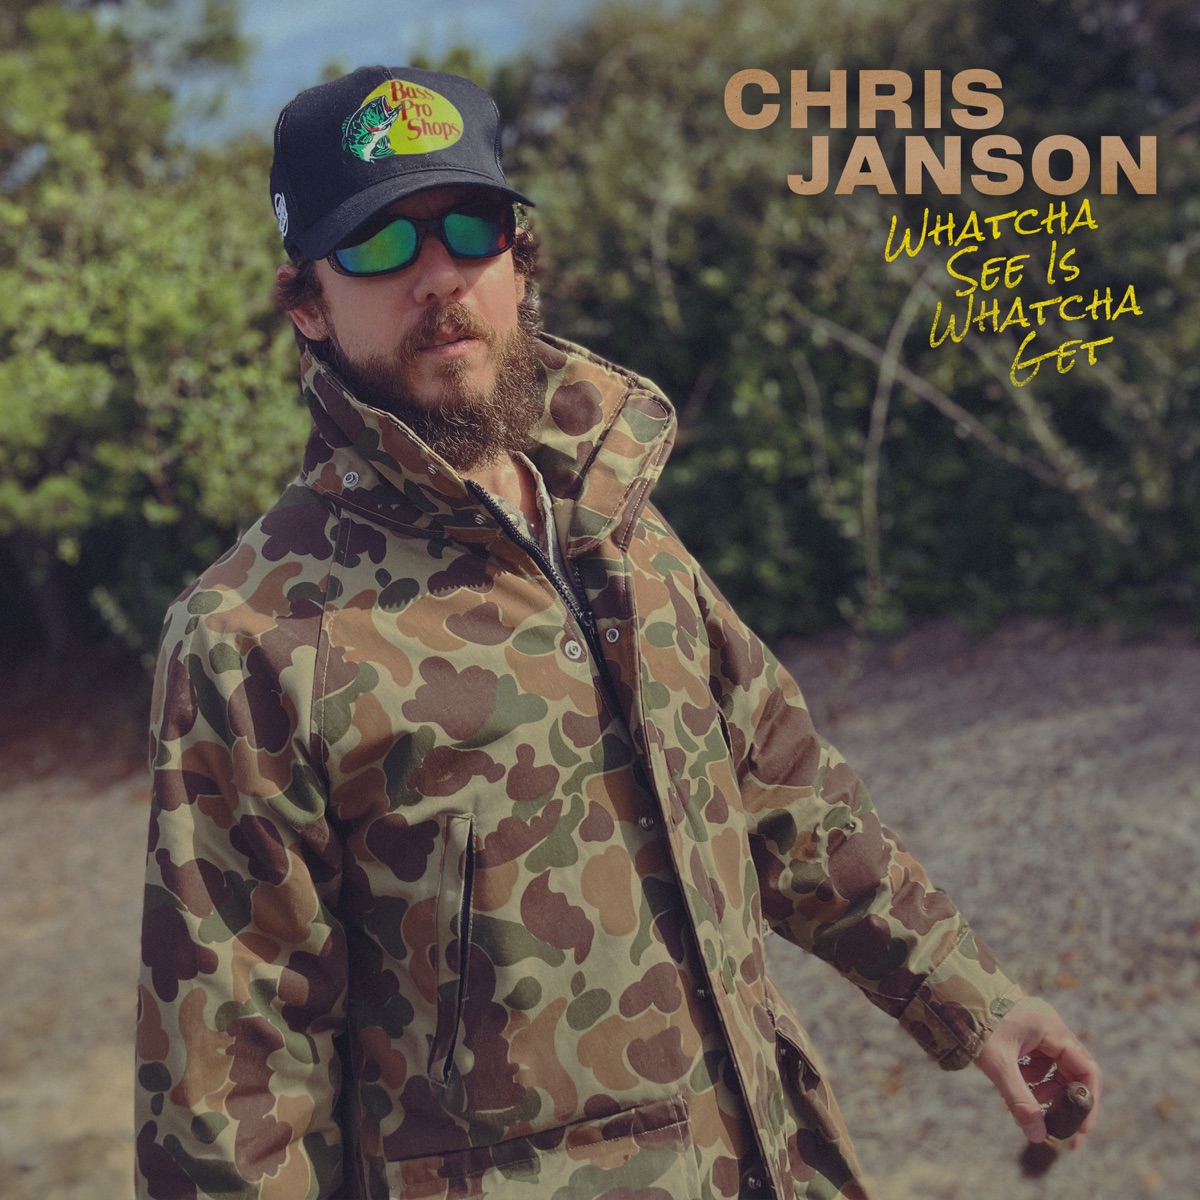 Chris Janson Whatcha See Is Whatcha Get cover artwork